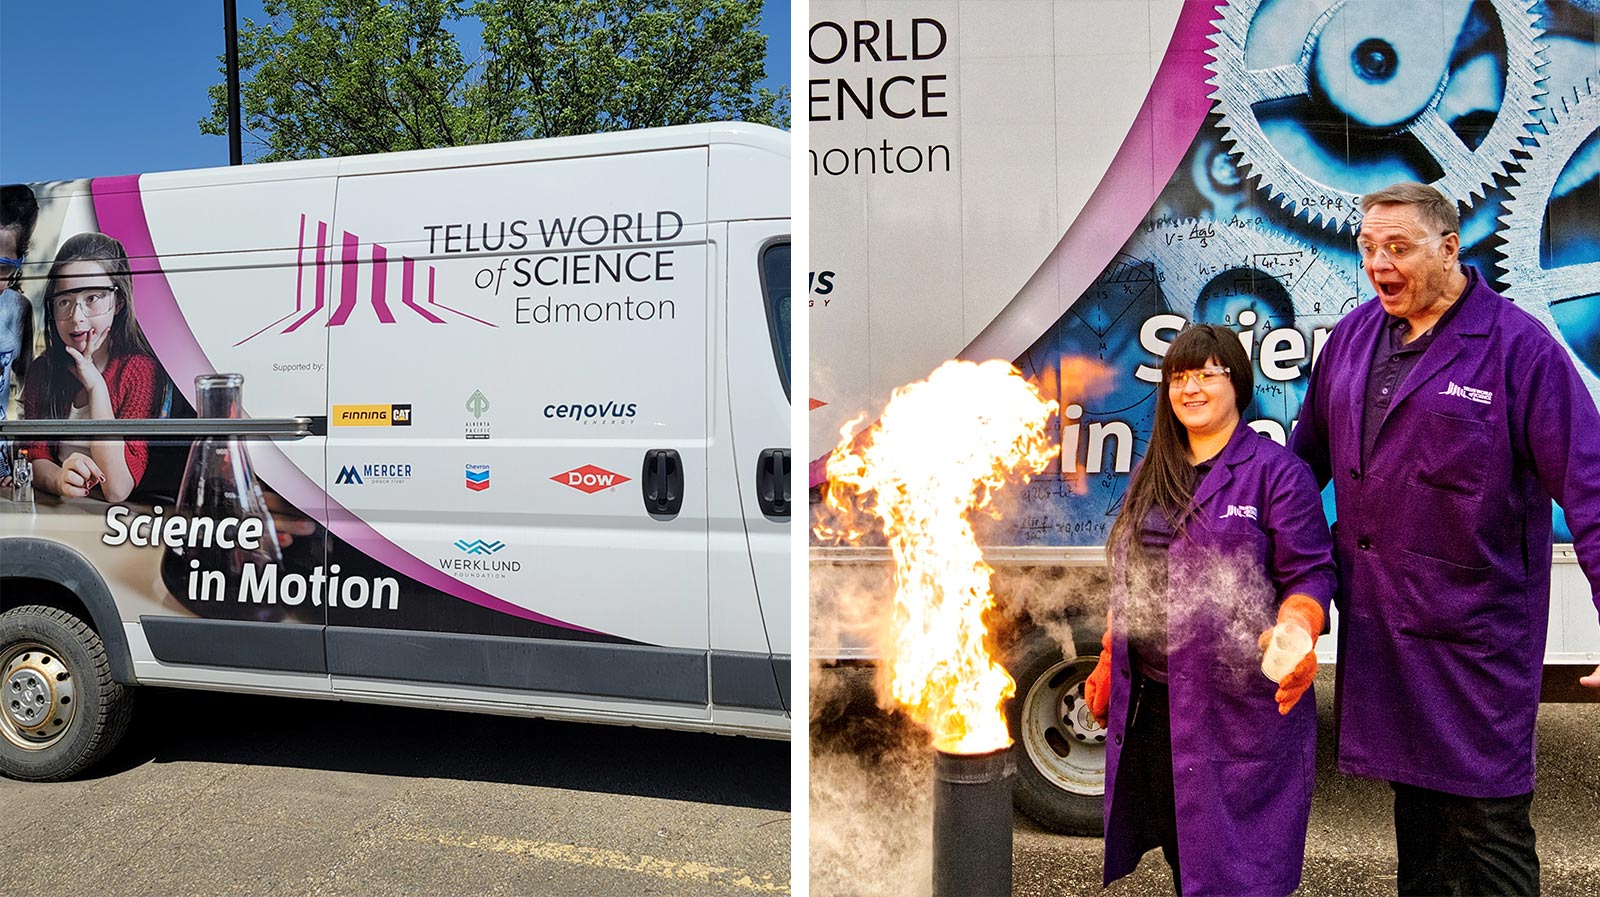 The TELUS Science in Motion van and a science demonstration with fire